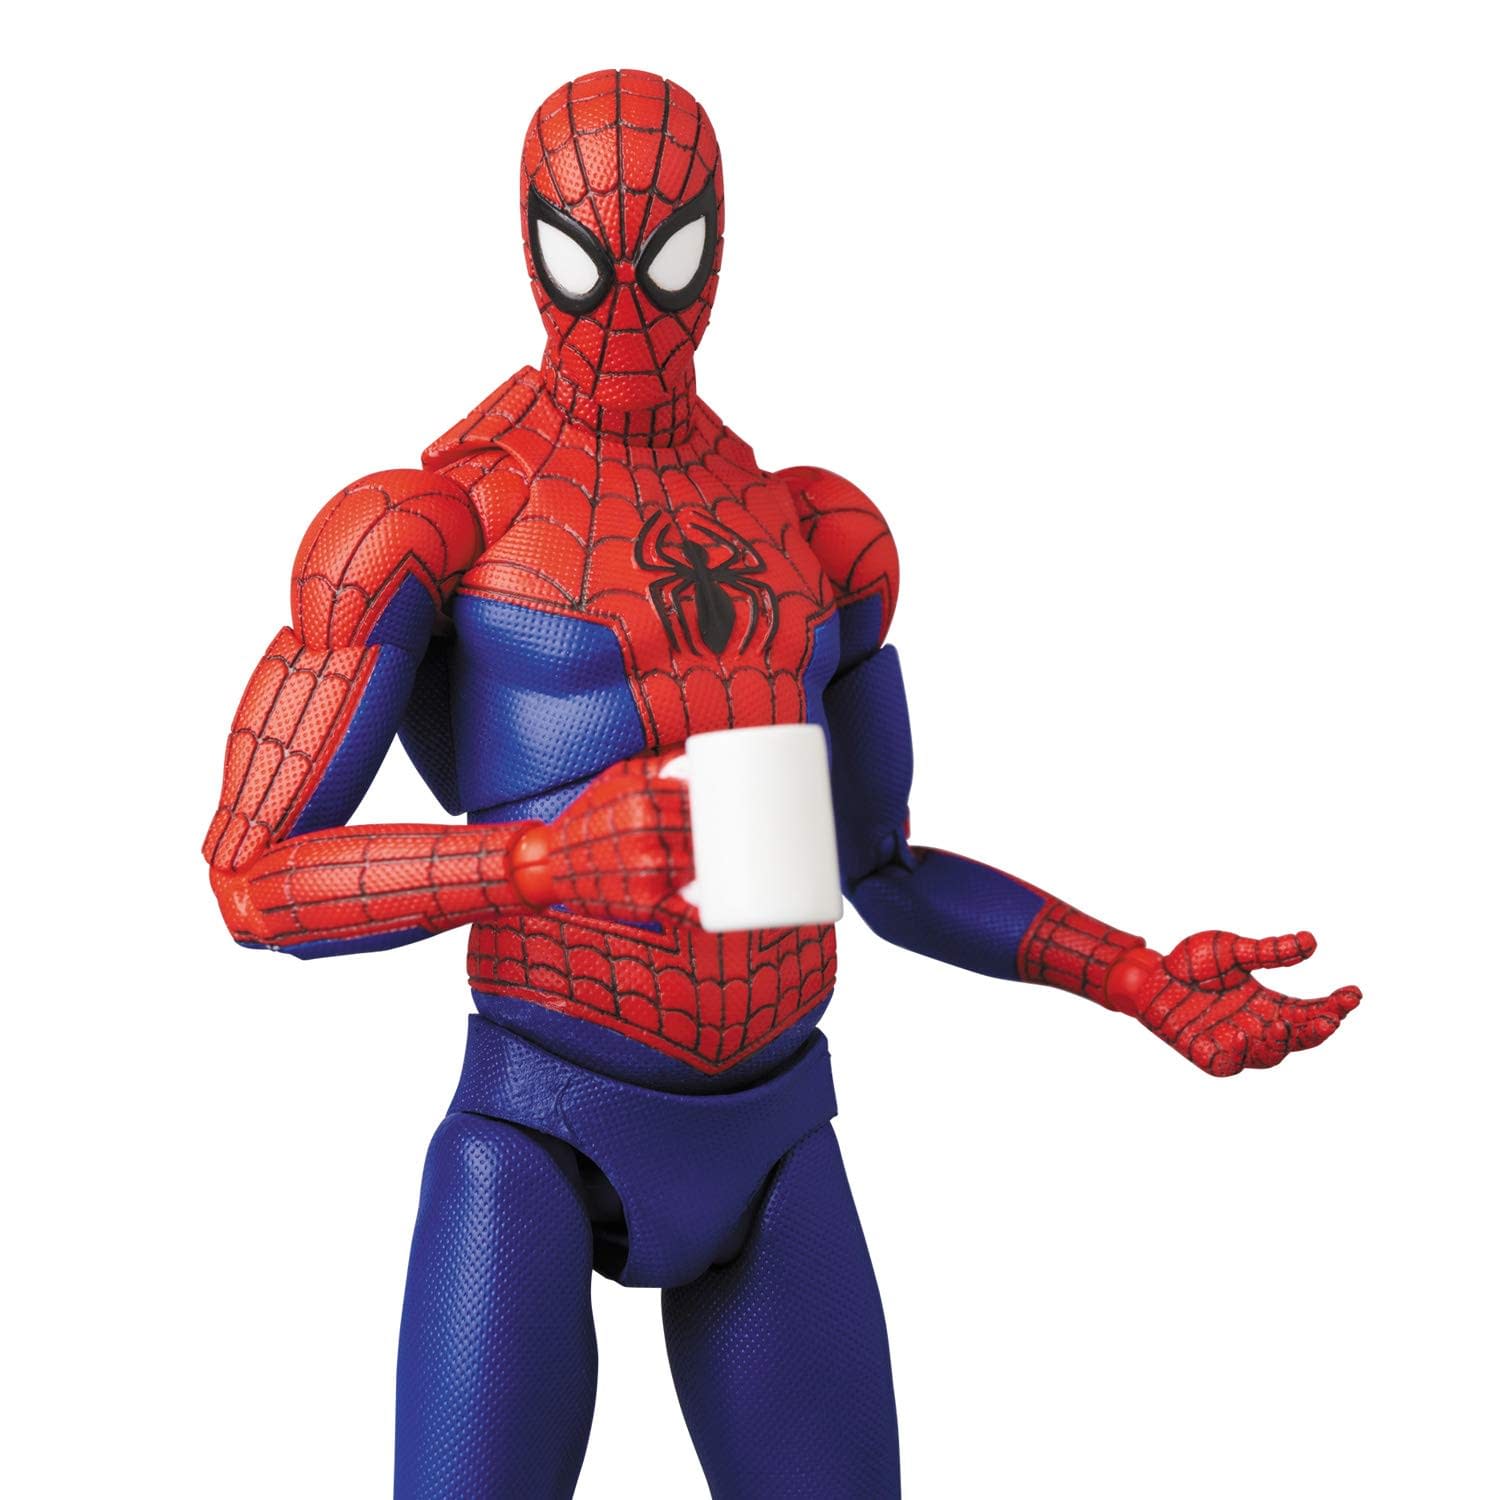 Spider-Man Swings Into Action with New Amazing Mafex Figure!